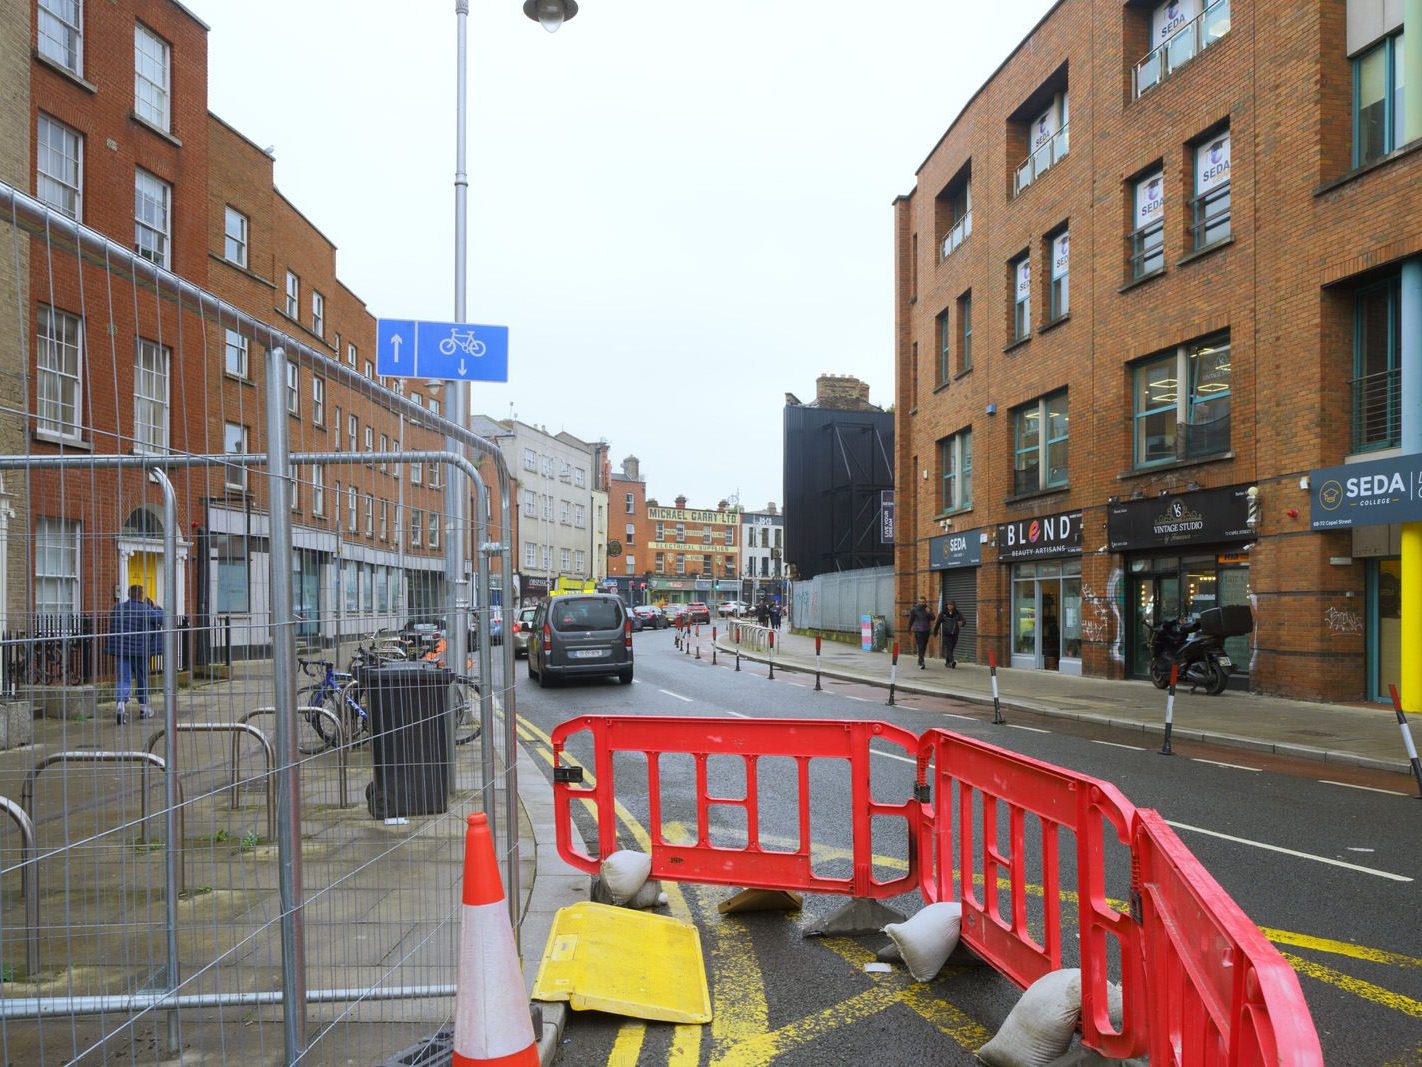 CAPEL STREET ON A DULL WET DAY [INTERIM CAPEL STREET IMPROVEMENT WORKS ARE NOW ONGOING] 004